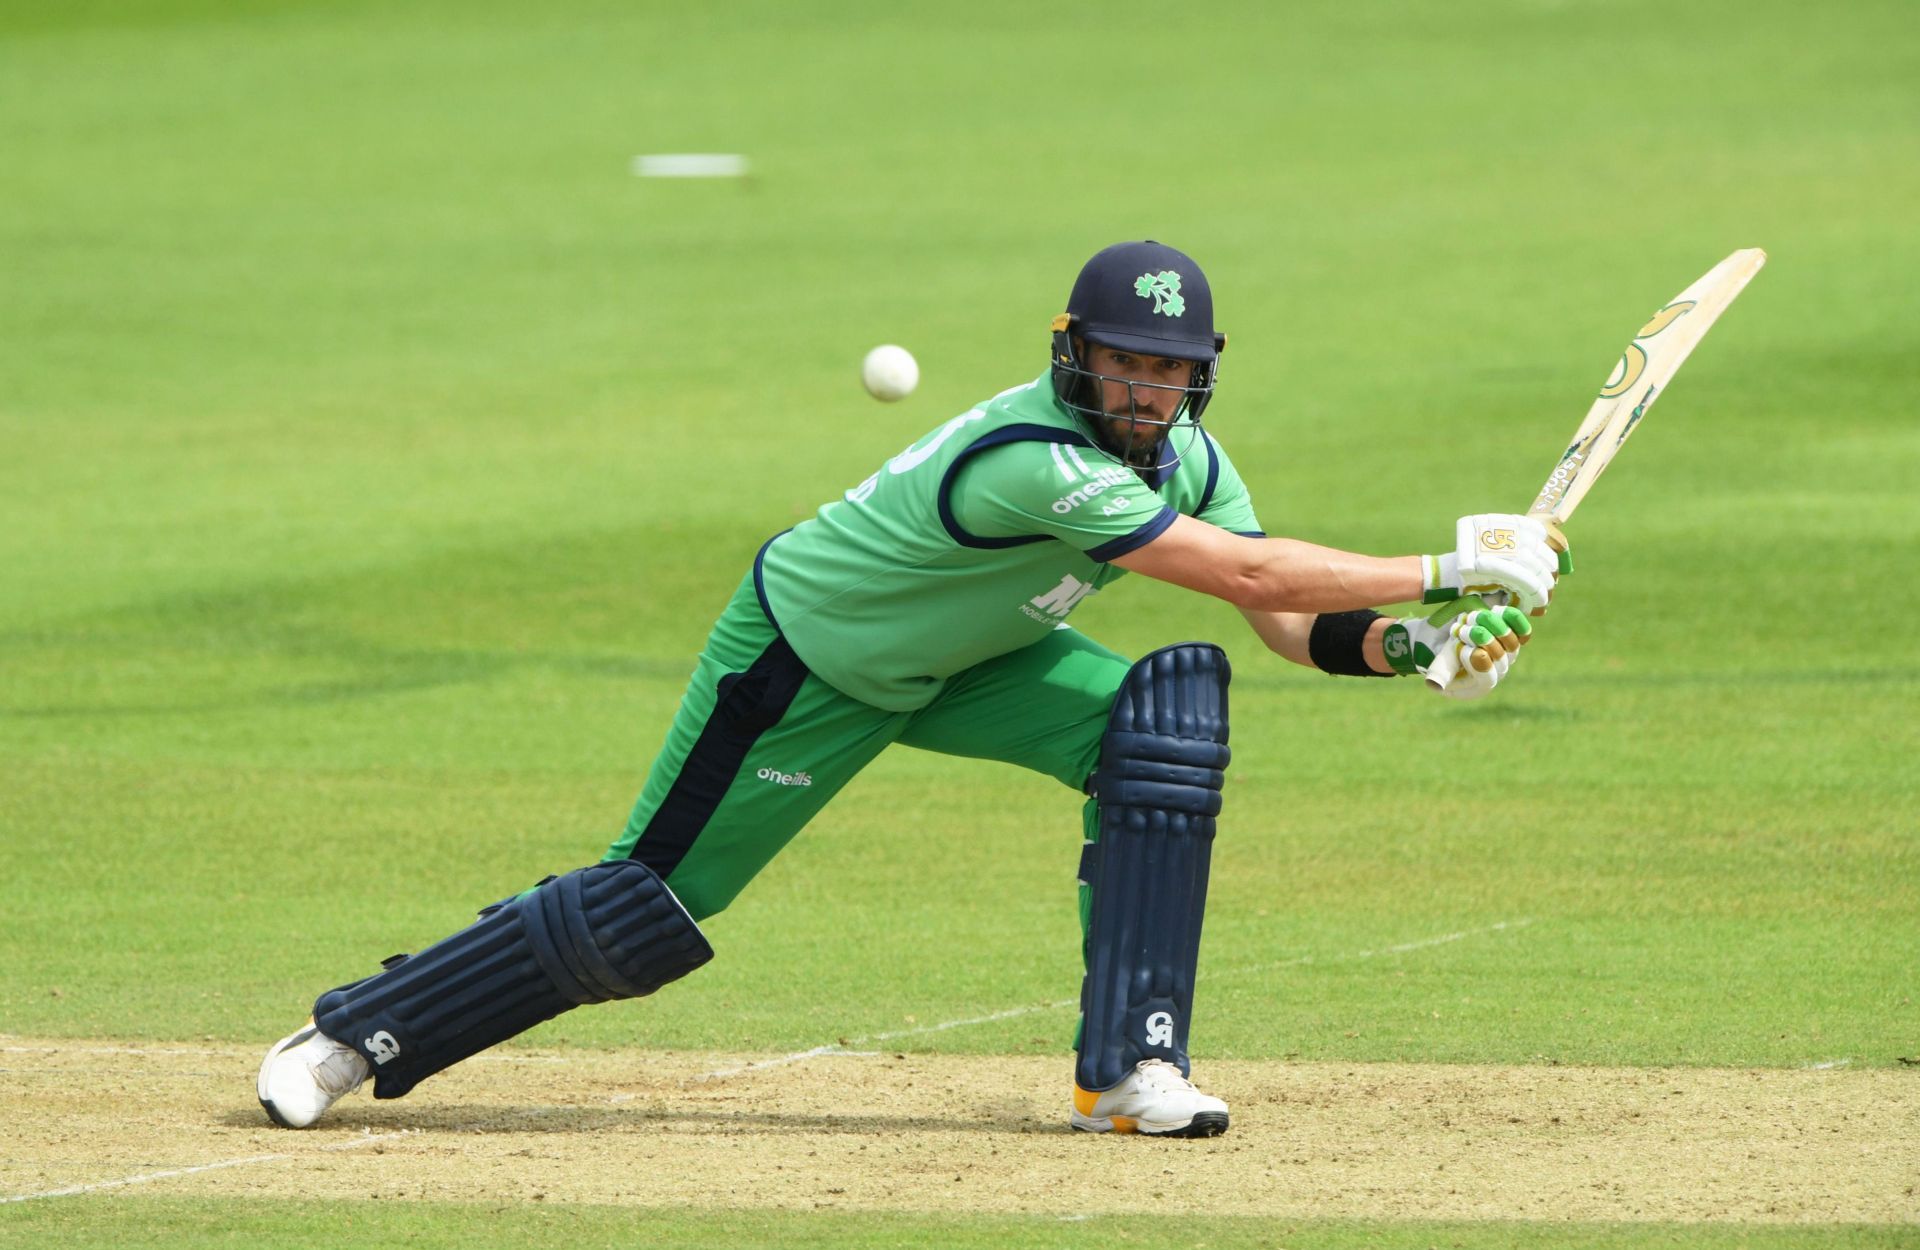 Ireland captain Andy Balbirnie. Pic: Getty Images